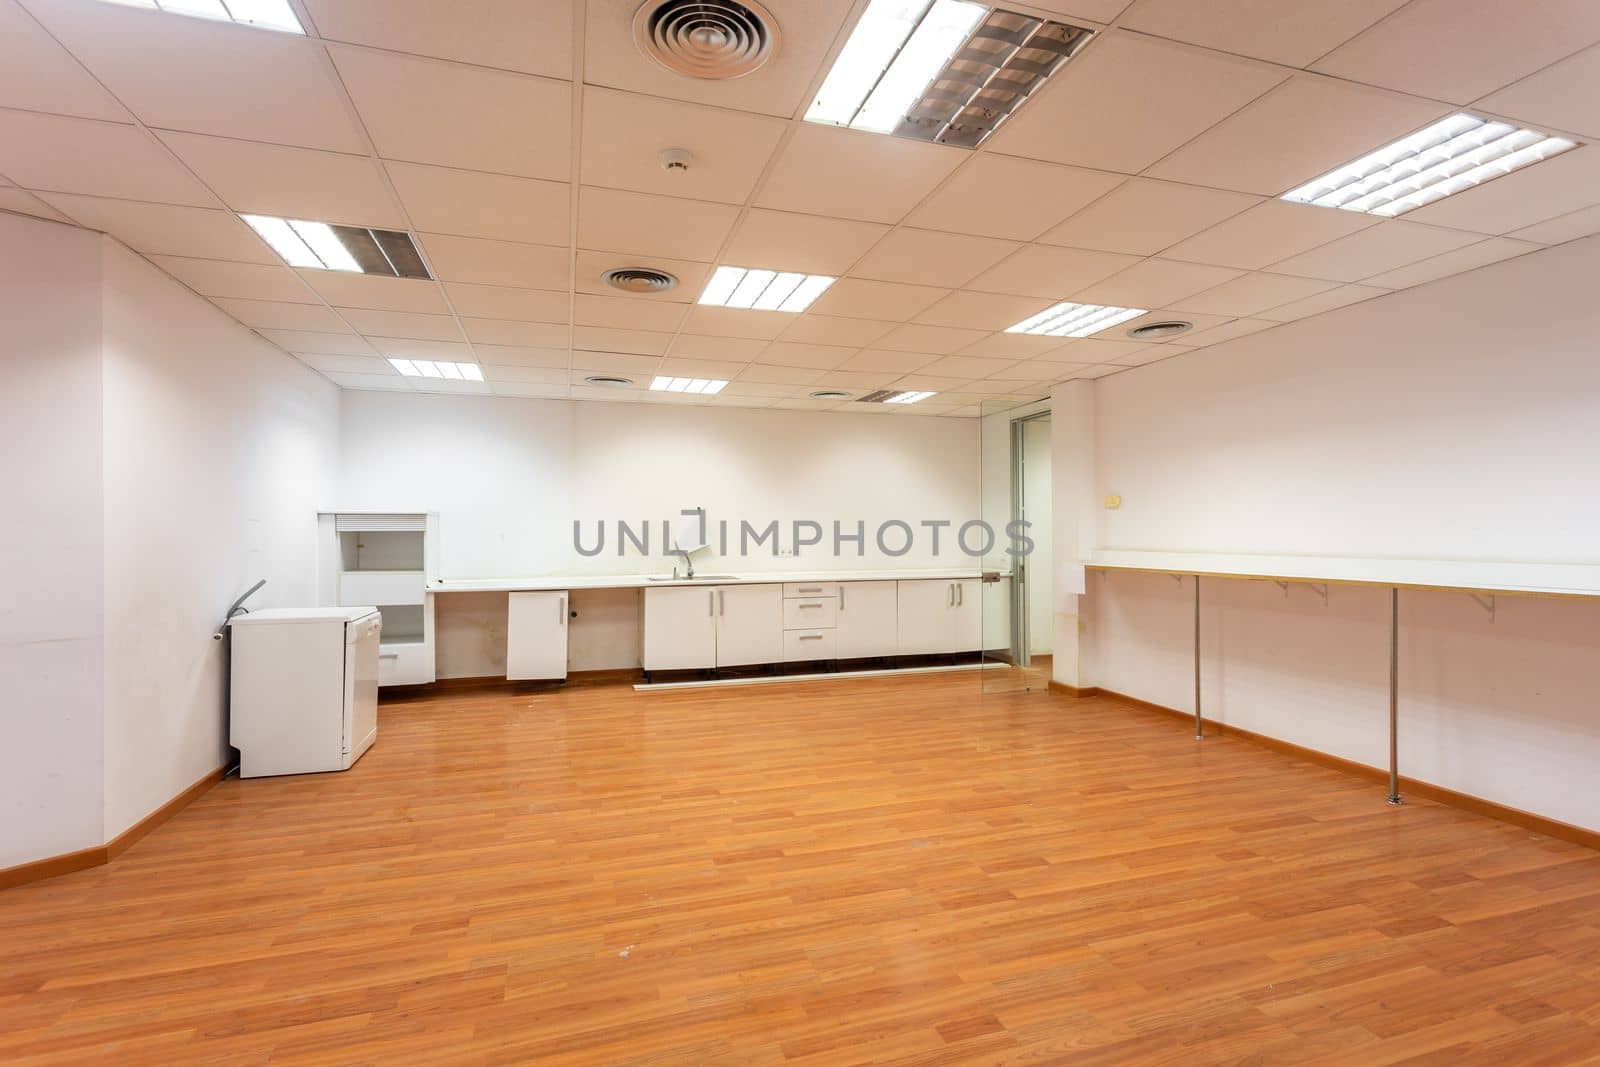 Old empty room with white kitchen furniture and sink that used to serve as office canteen for employees. A spacious and bright room, equipped as corporate dining room, needs new and fresh renovation